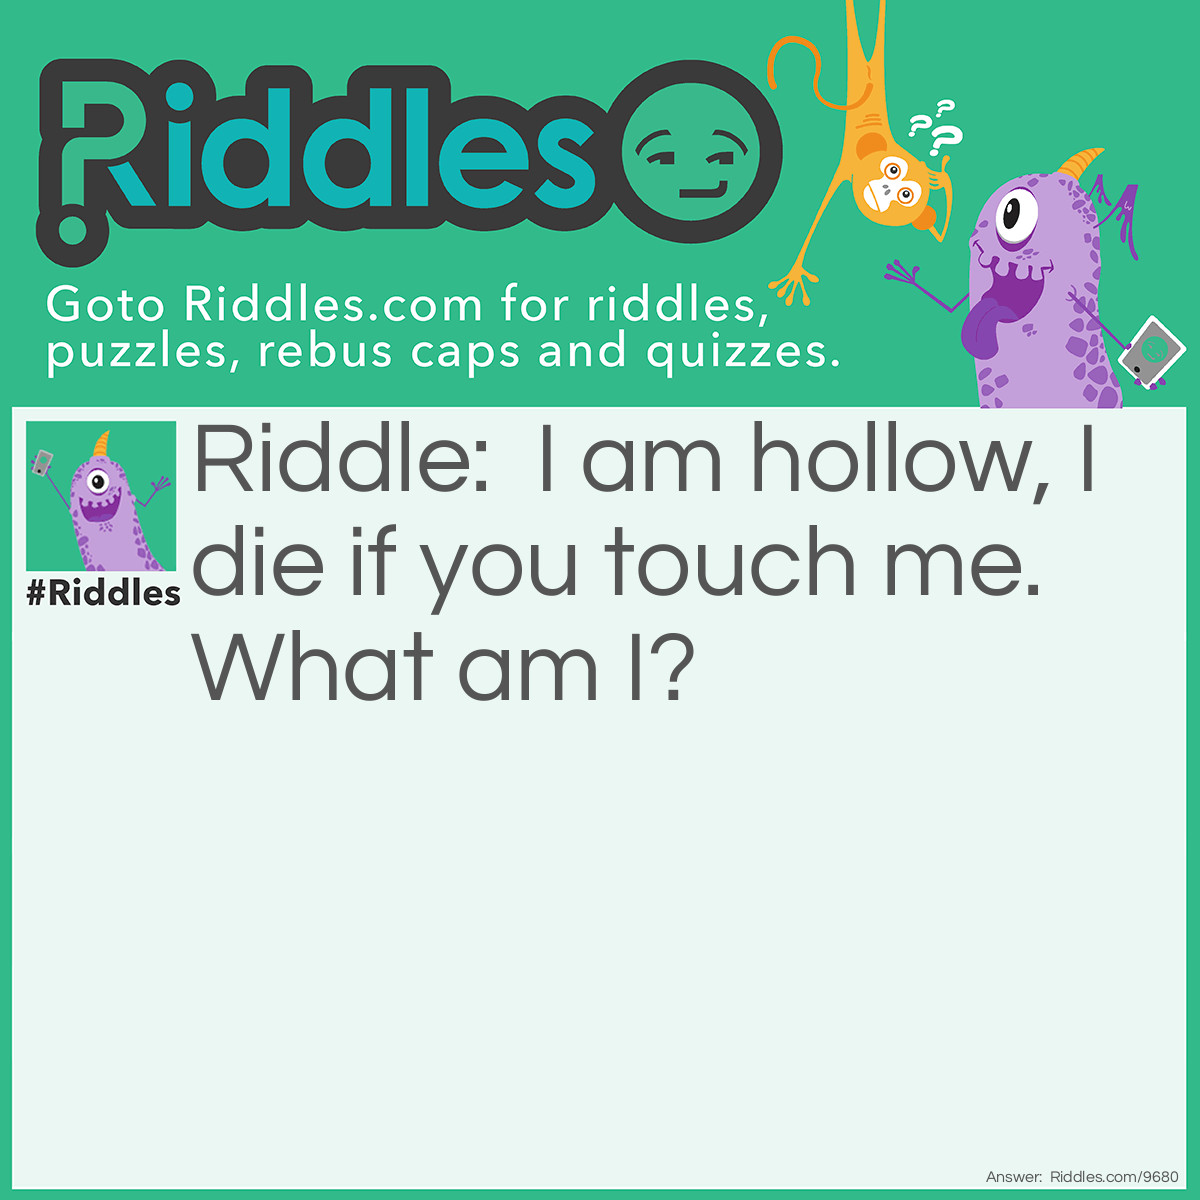 Riddle: I am hollow, I die if you touch me. What am I? Answer: A bubble!